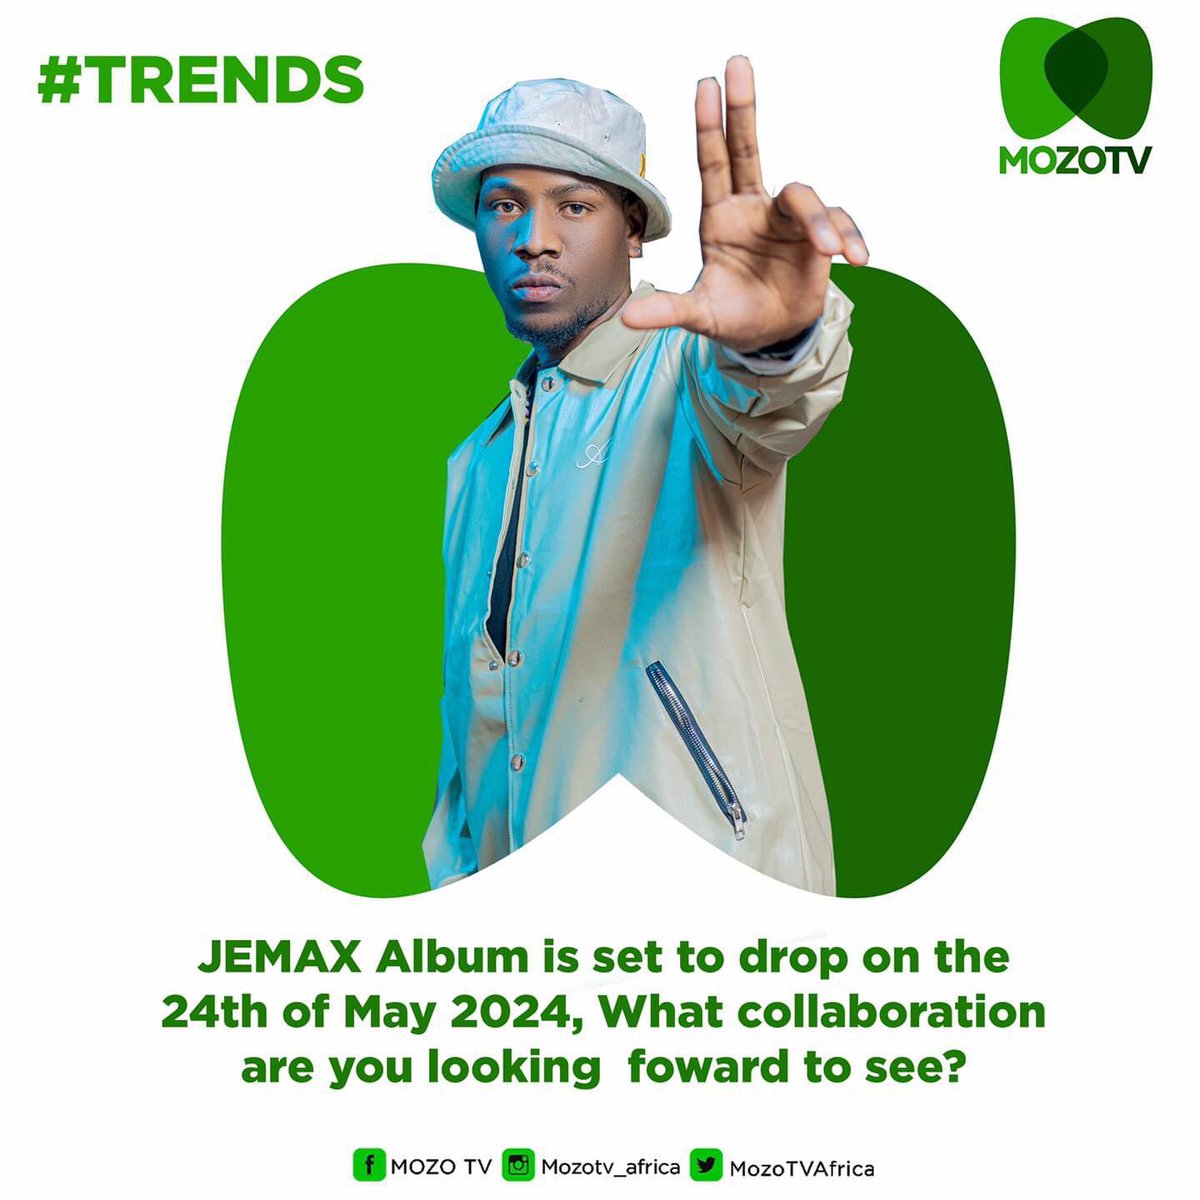 #TRENDS Did you know that @JEMAX_Jemudaeh will be dropping his music album on 24th May? We are definitely looking forward to this 🥳💃🏽 What collaboration are you looking forward to seeing in the album? Comment below👇🏽 💚 #ARefreshingExperience #Trends #ZmabianMusic